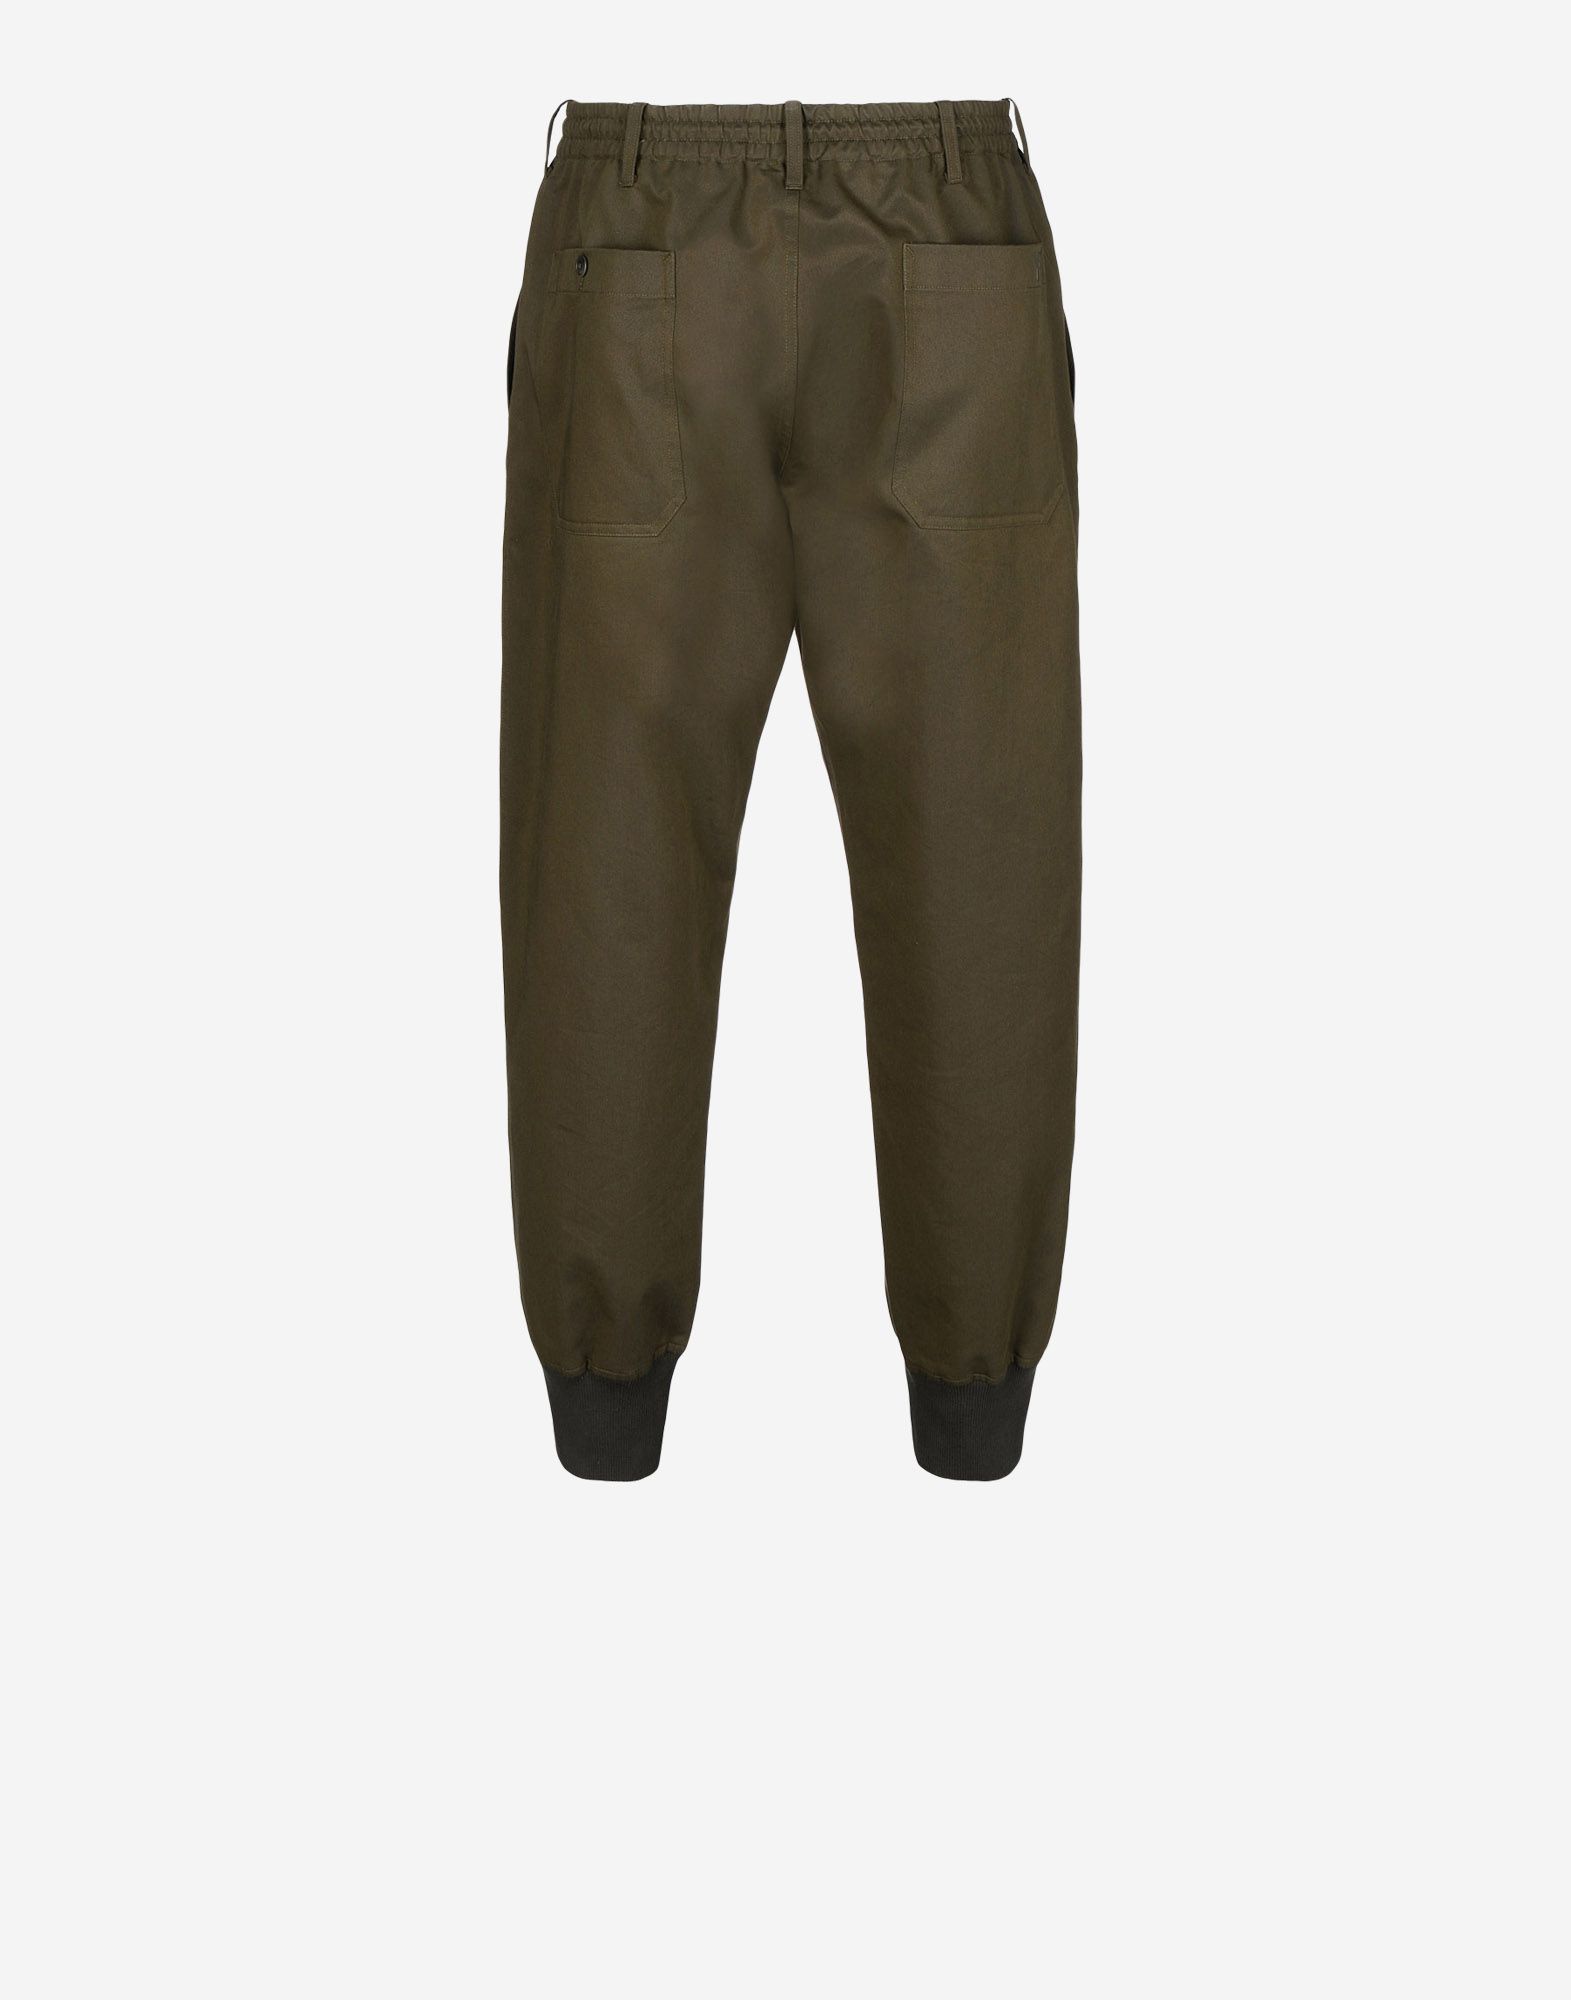 Y 3 JET PANT for Men | Adidas Y-3 Official Store